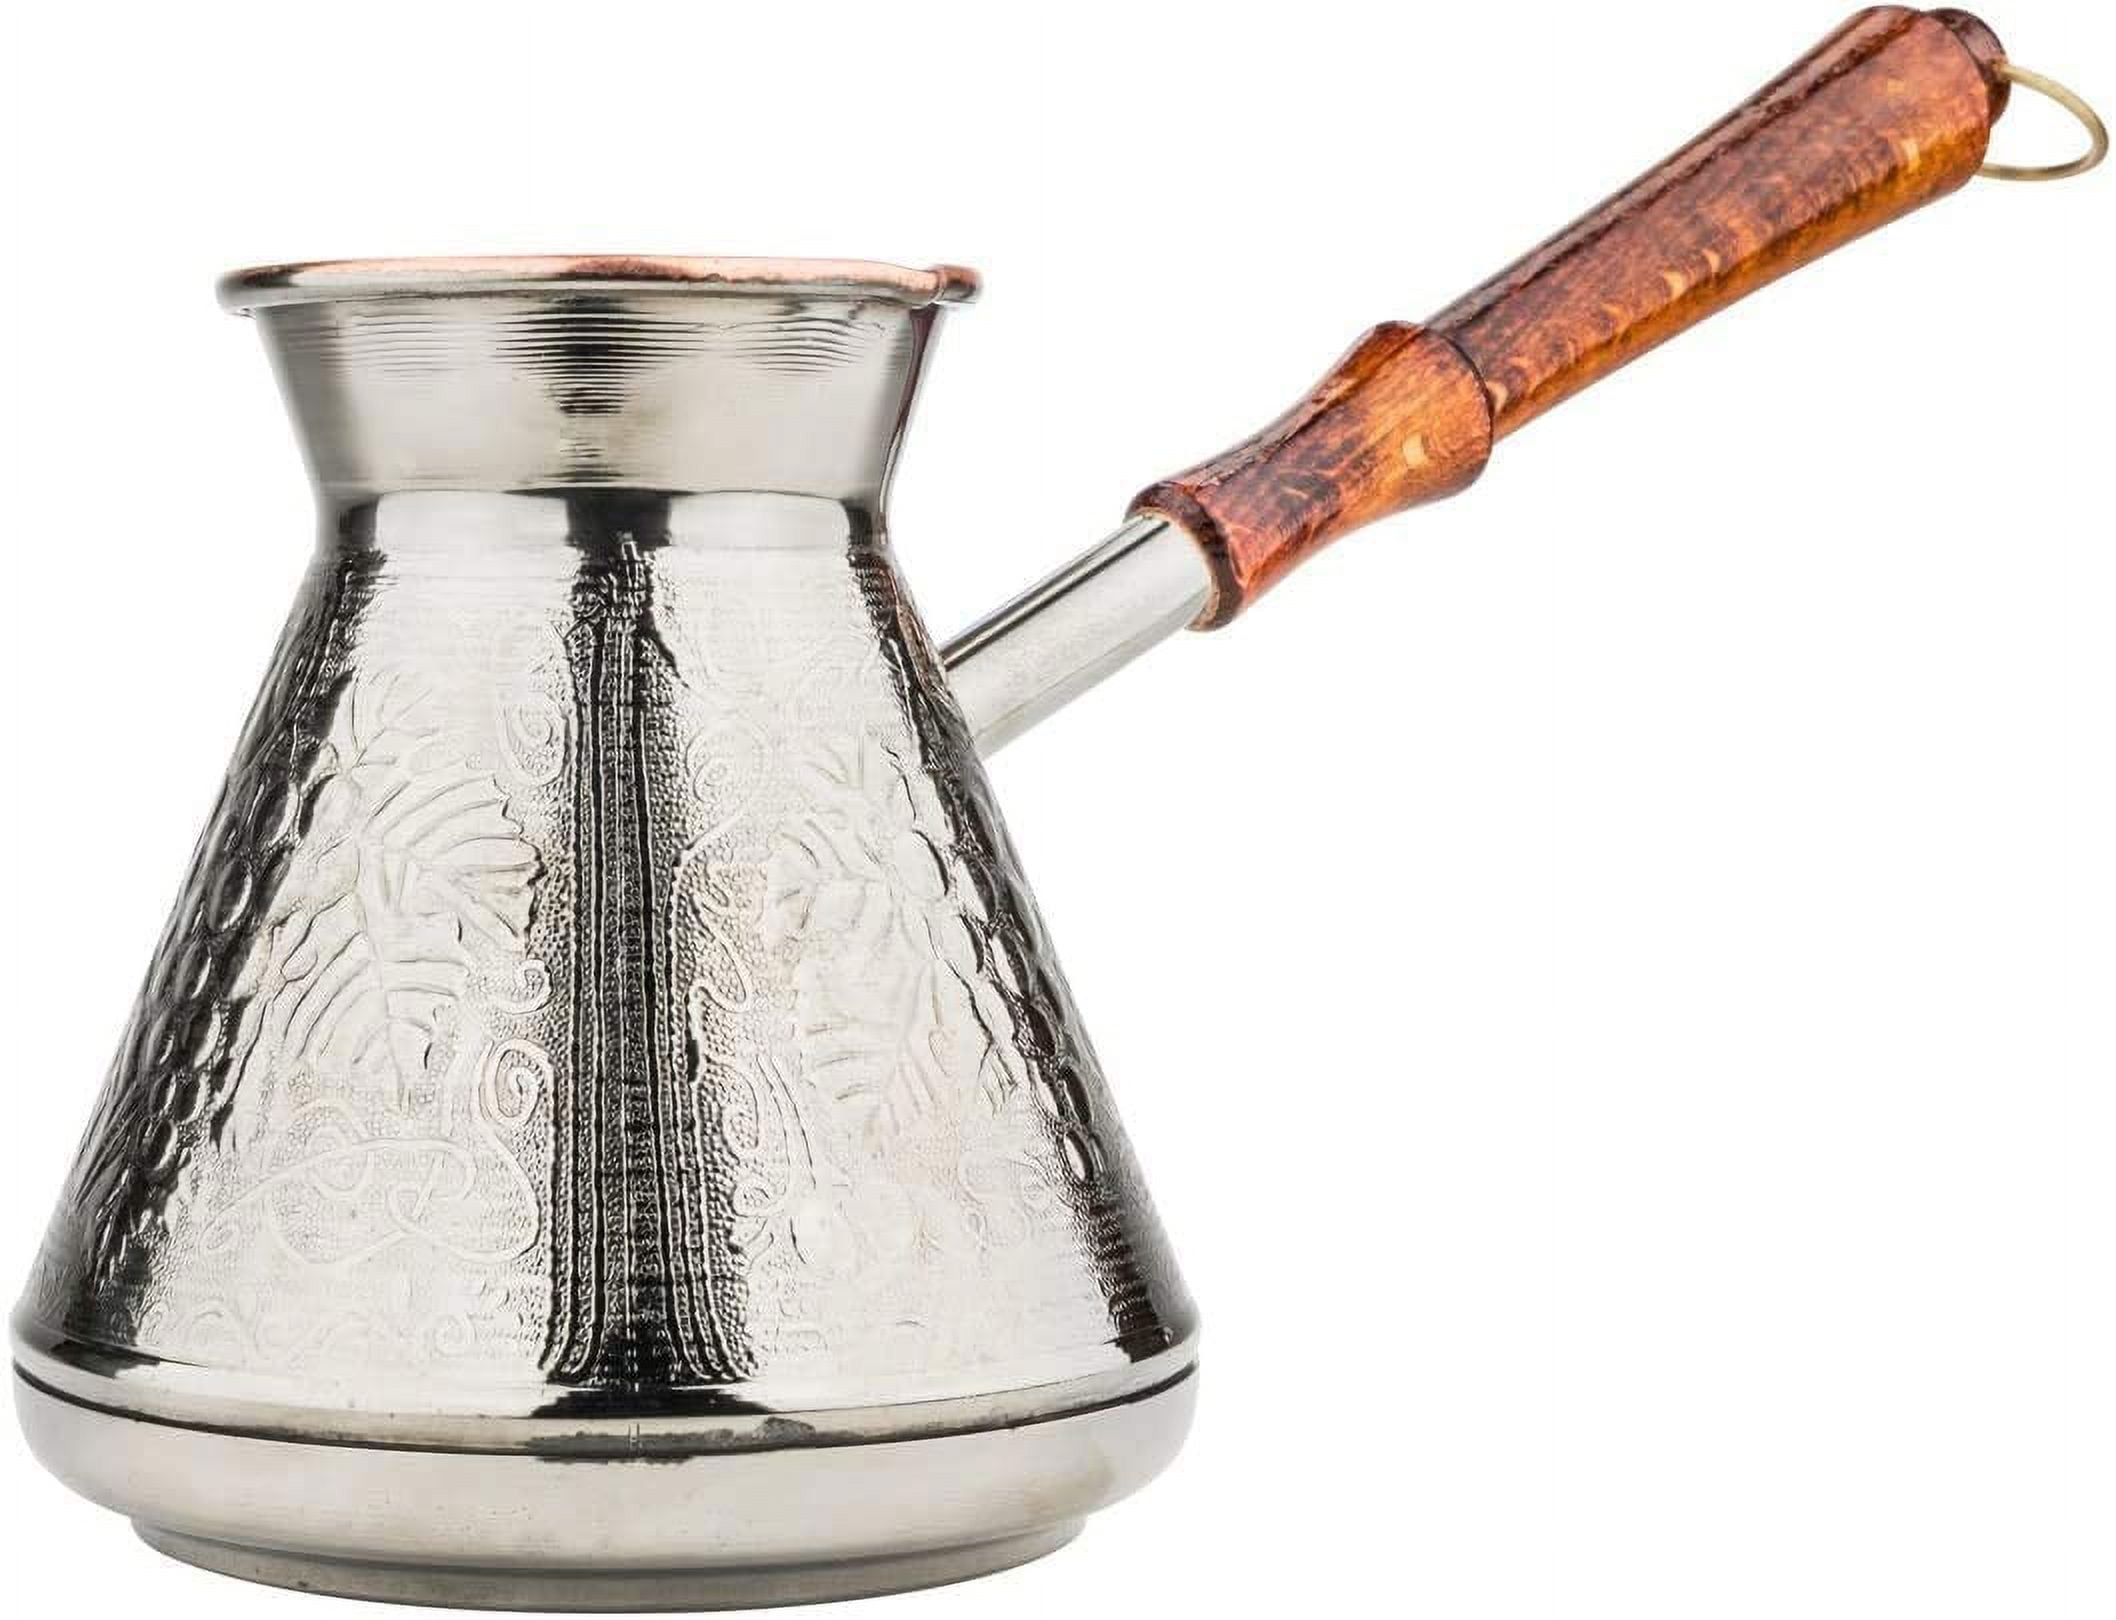 Hot Coffee In Traditional Turkish Cup, Copper Cezve (turka